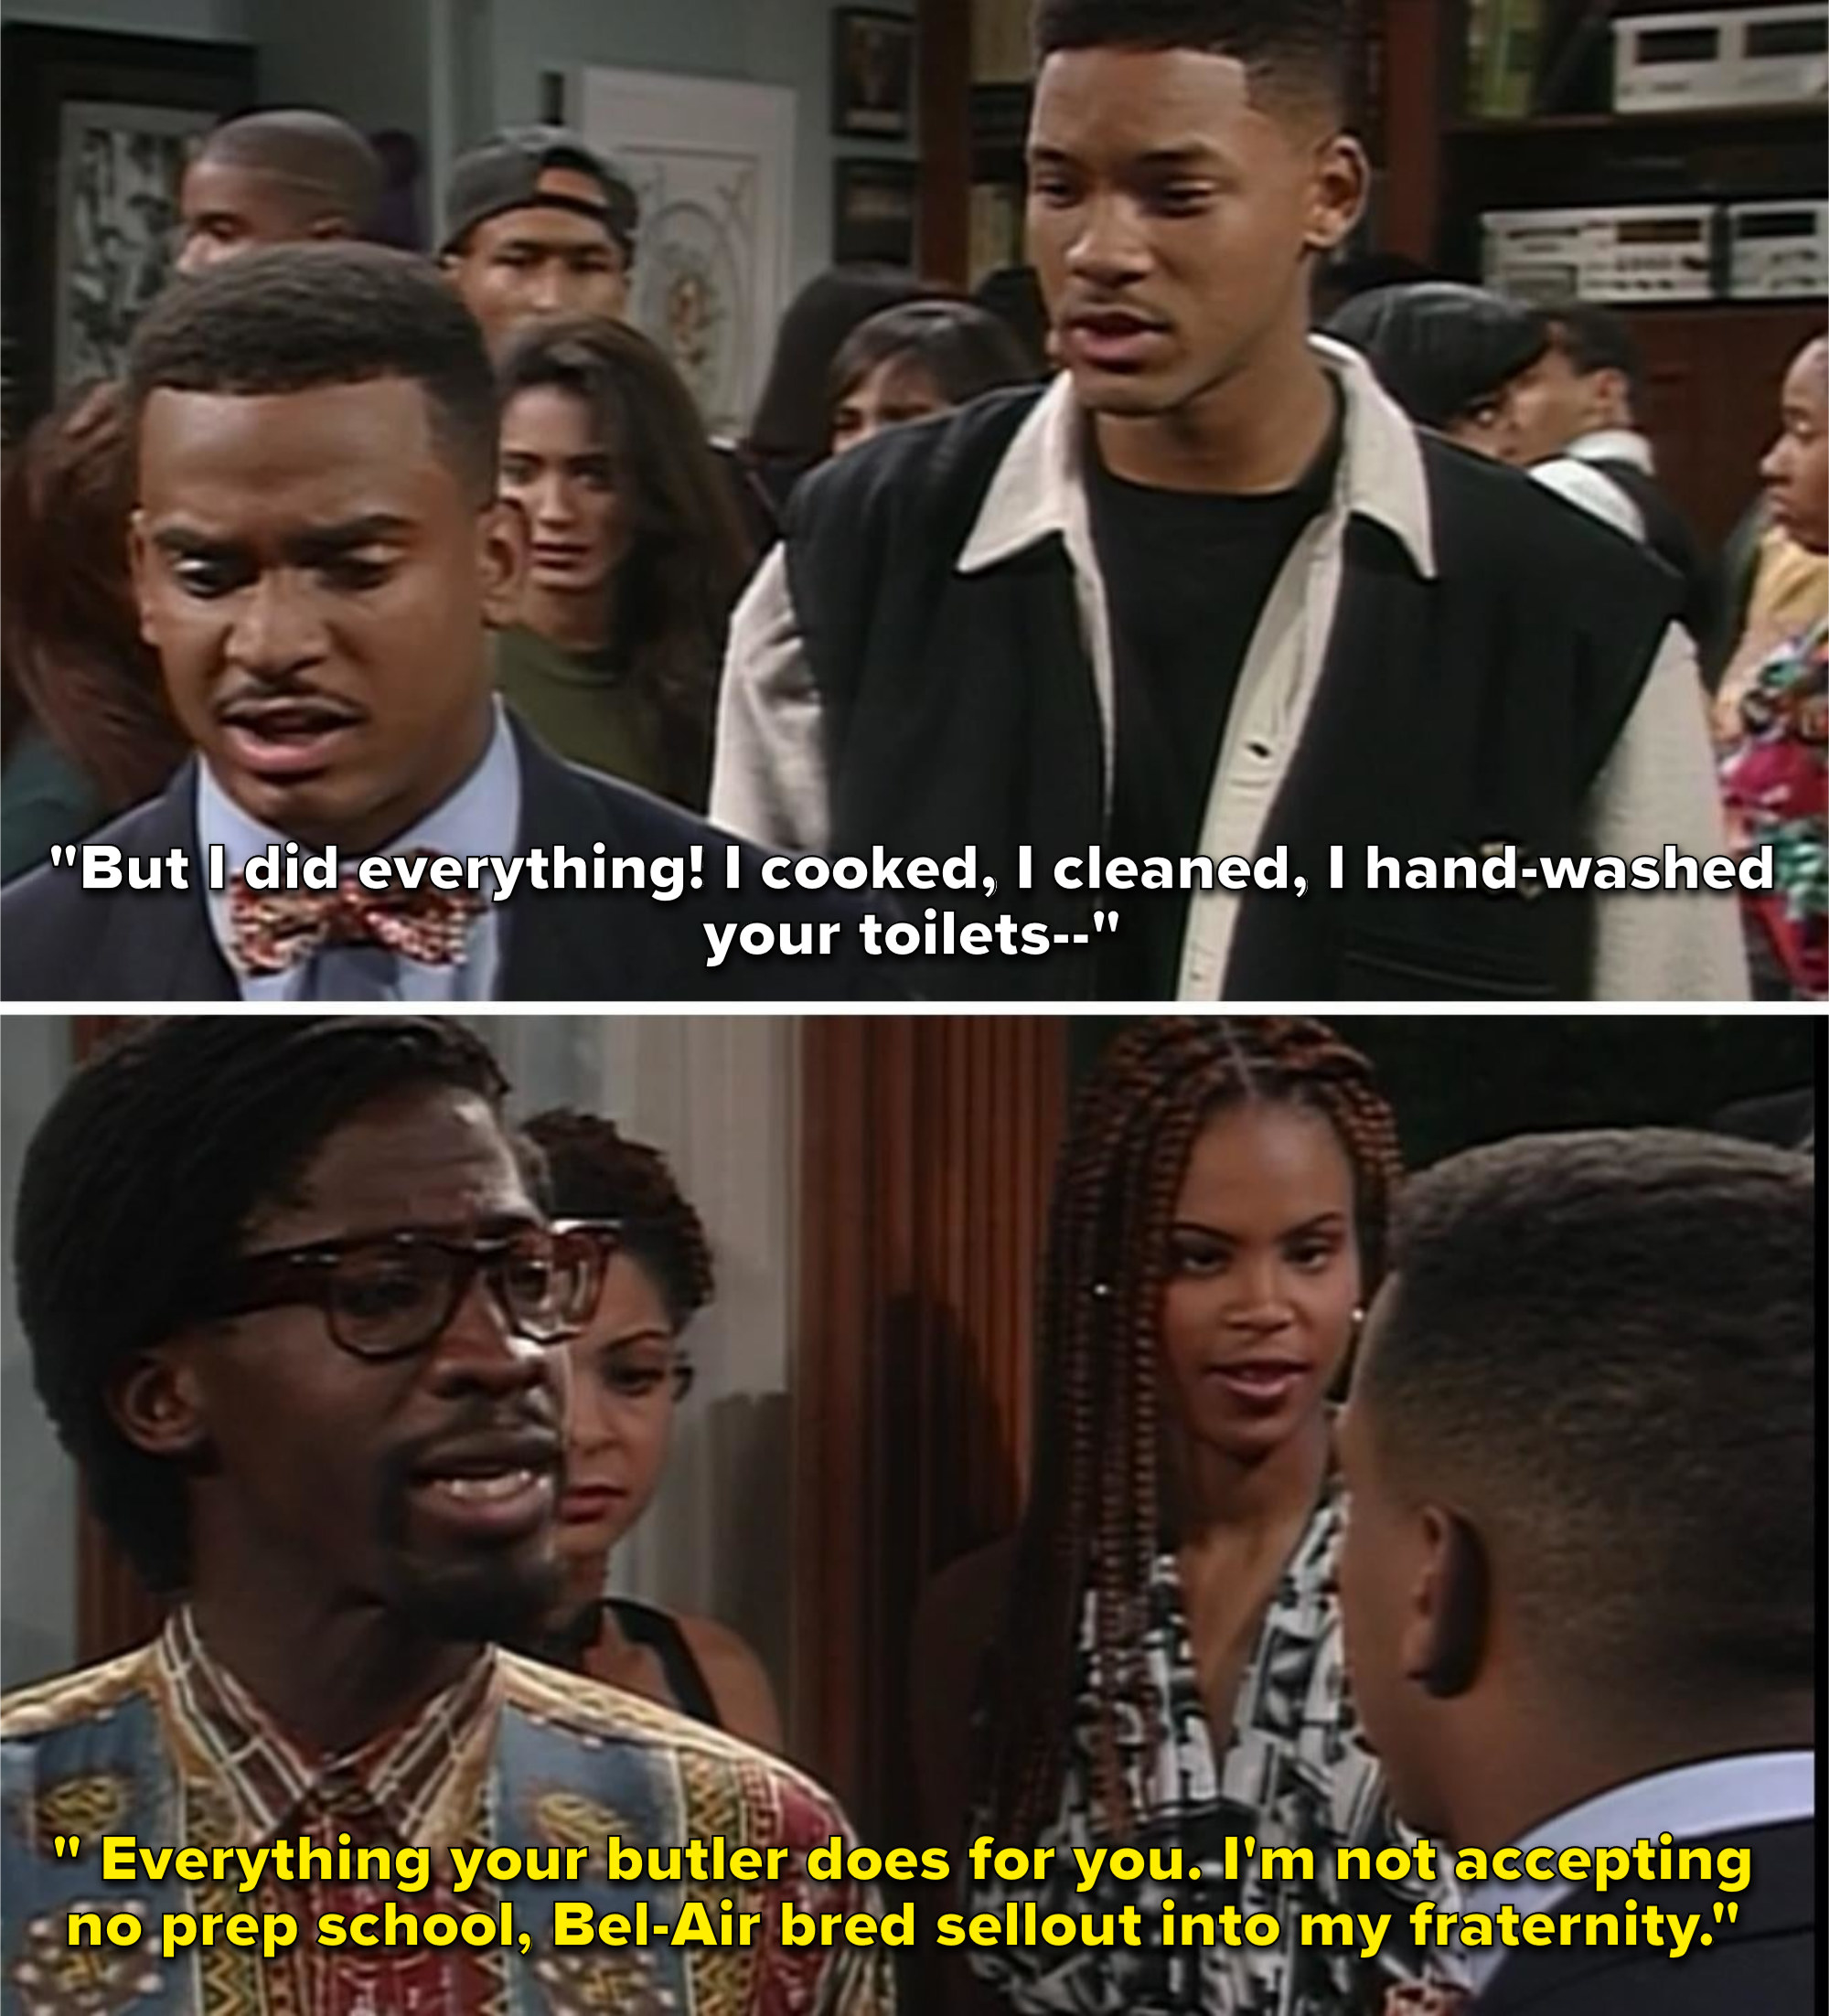 Carlton trying to understand why they won&#x27;t let him into the fraternity and the head saying it&#x27;s because he&#x27;s a sellout